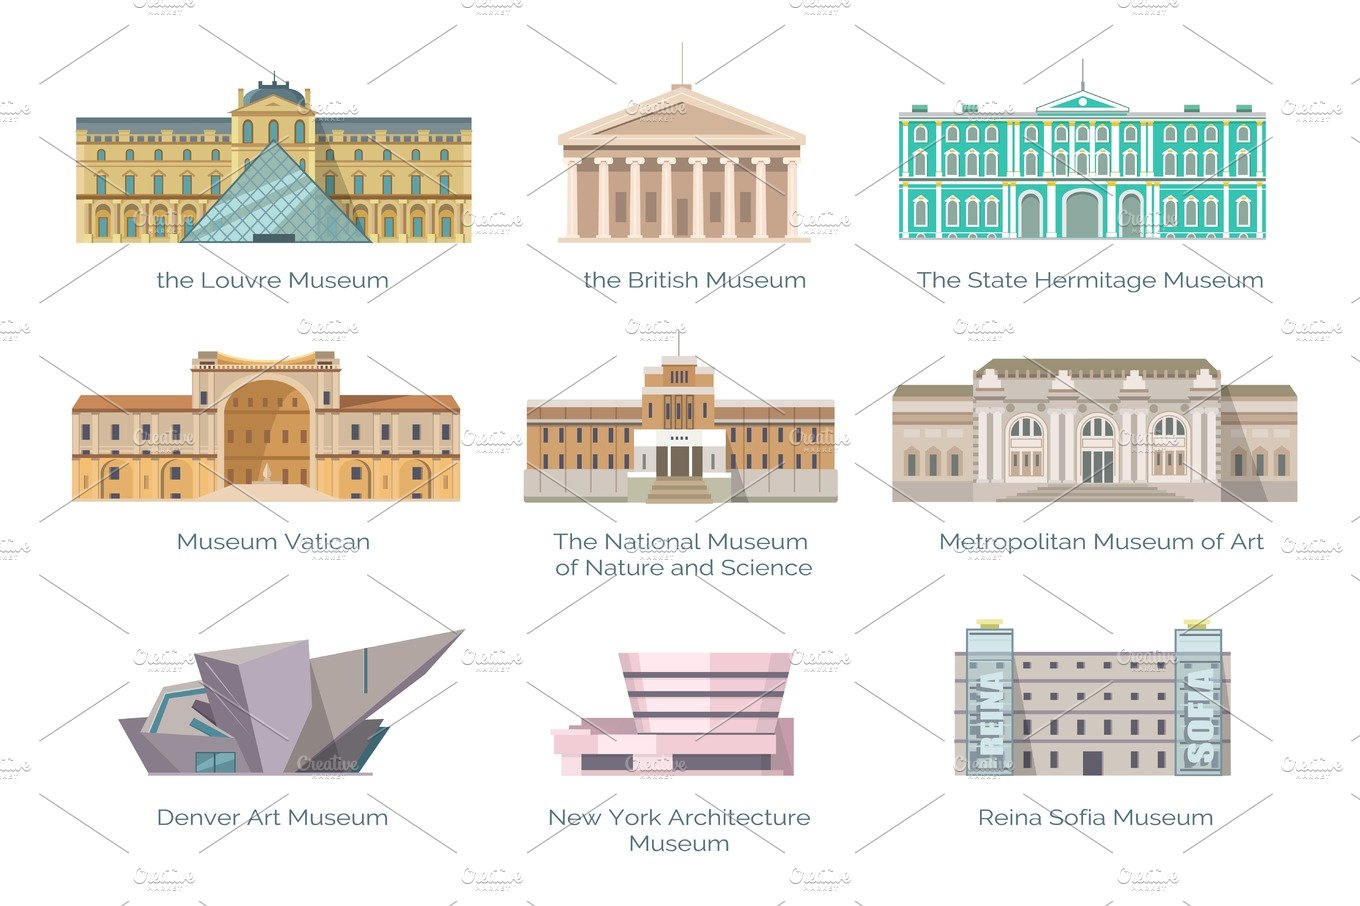 Most Famous Museums in Whole World Illustration cover image.